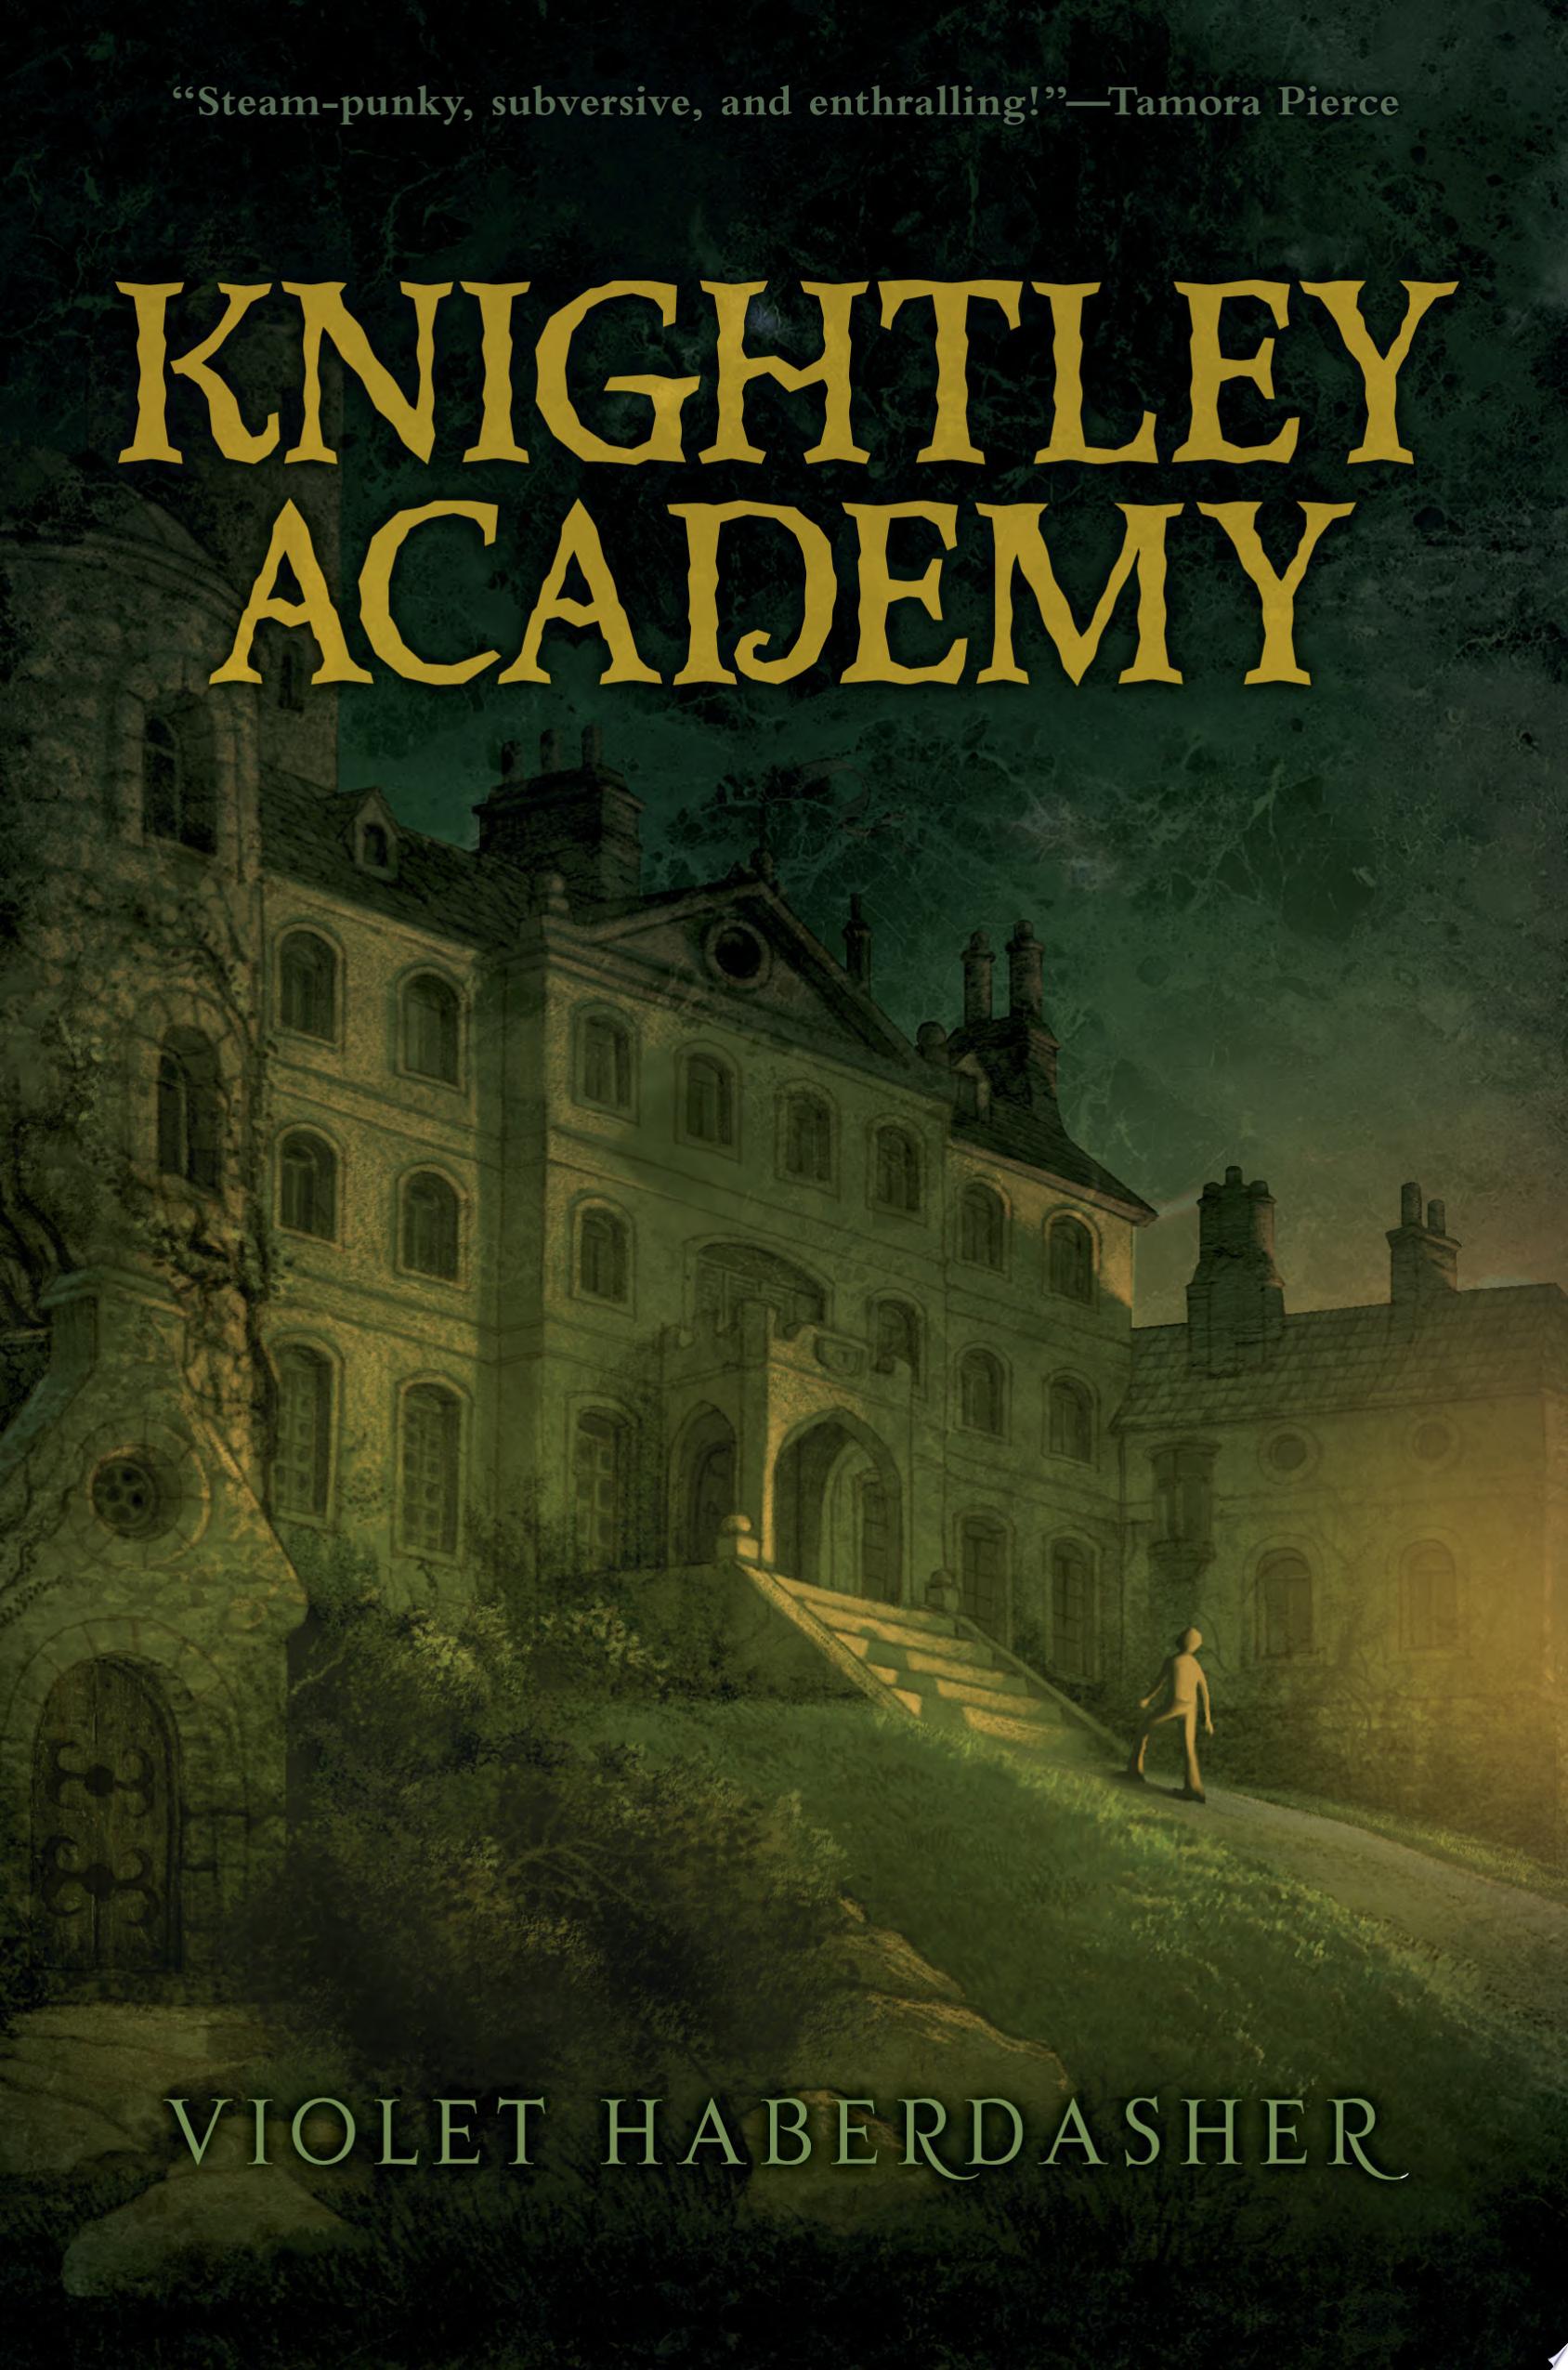 Image for "Knightley Academy"